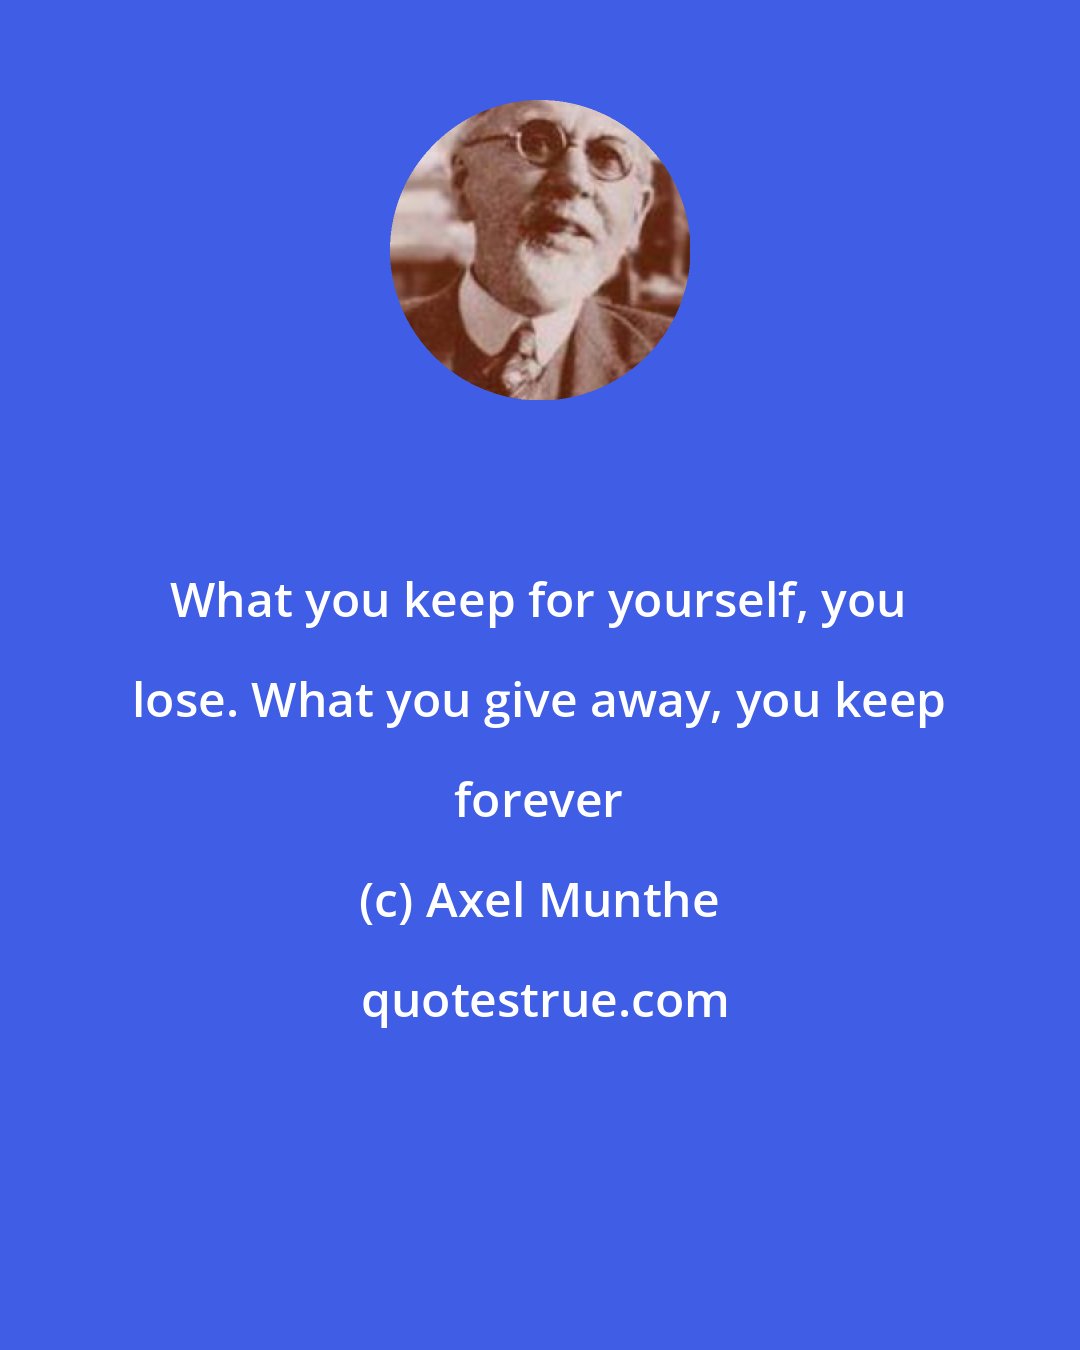 Axel Munthe: What you keep for yourself, you lose. What you give away, you keep forever